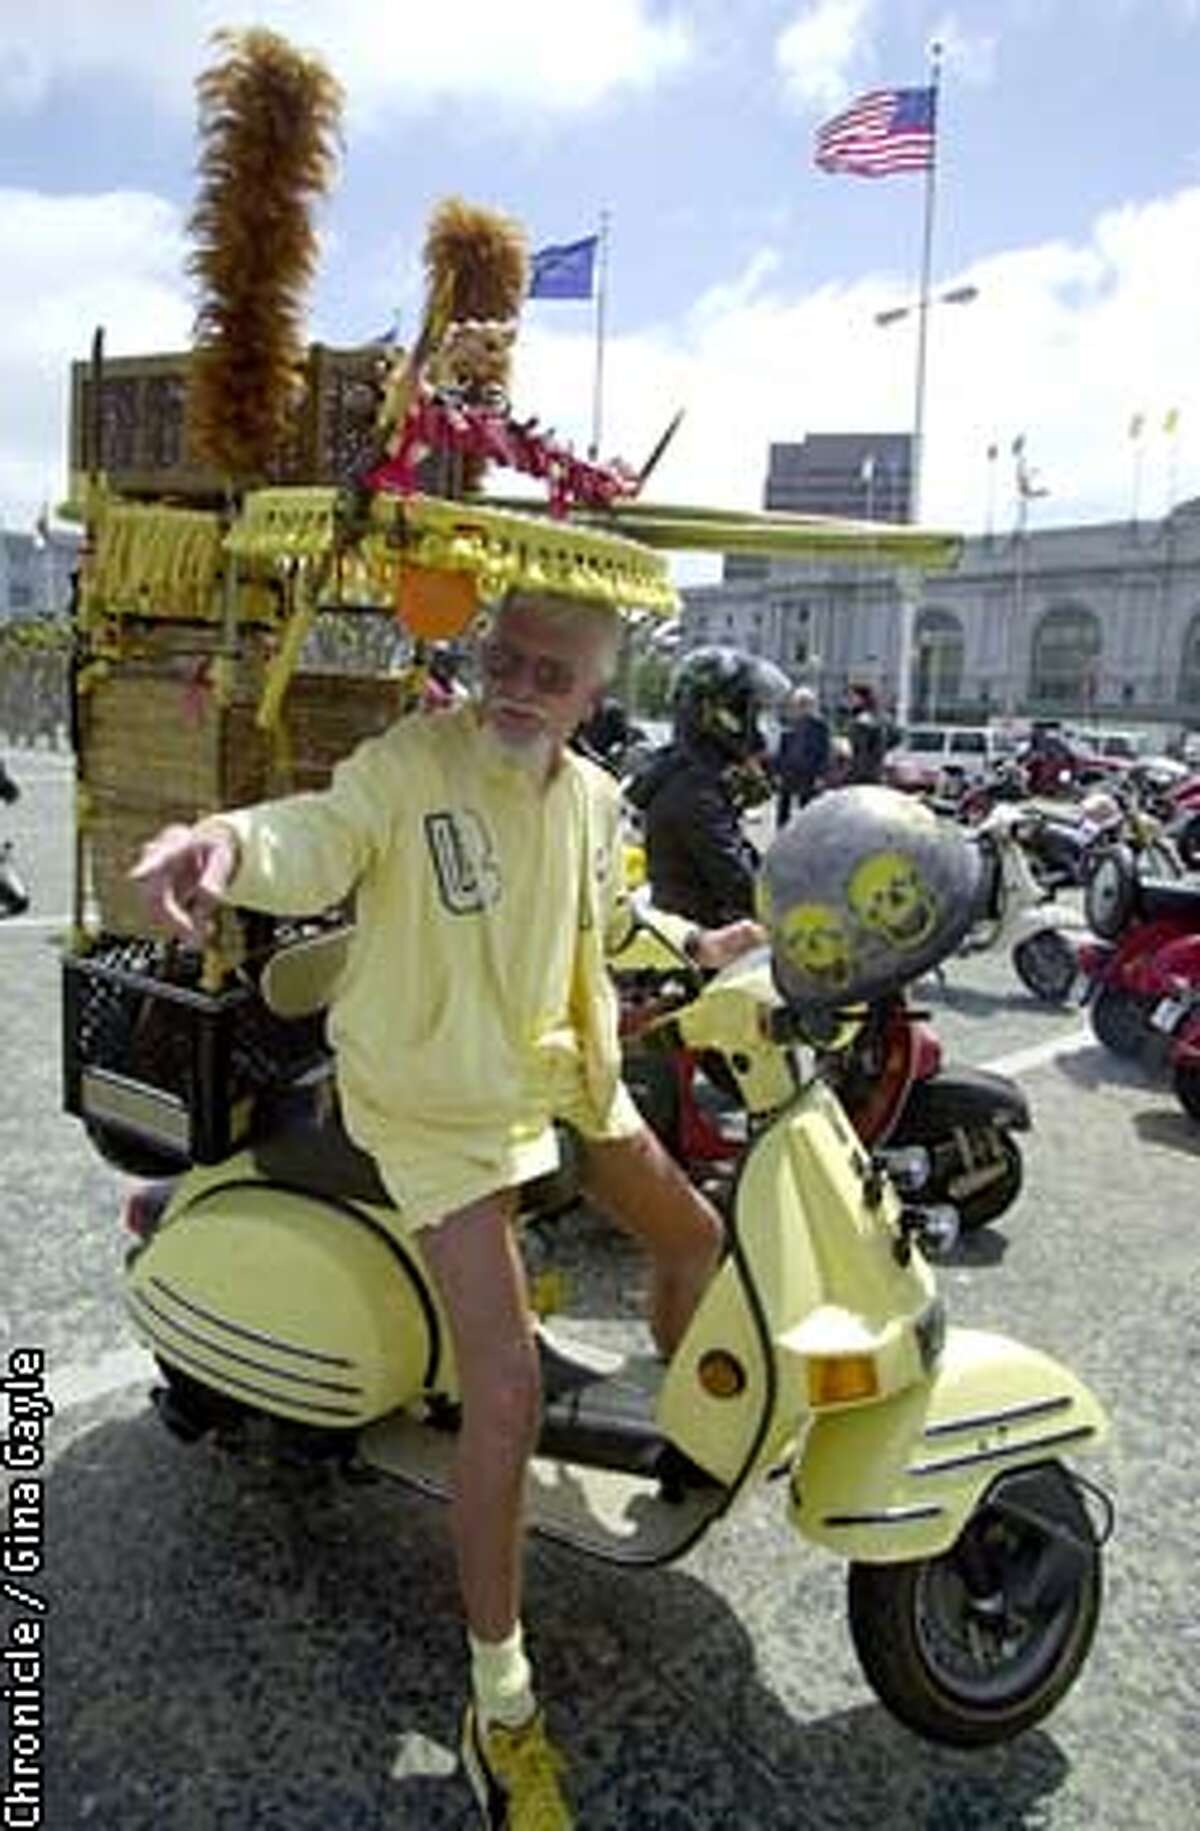 MOTORCYCLES_05/07/03_COLOR_5star_A-Section_A21_5"_lj x8944